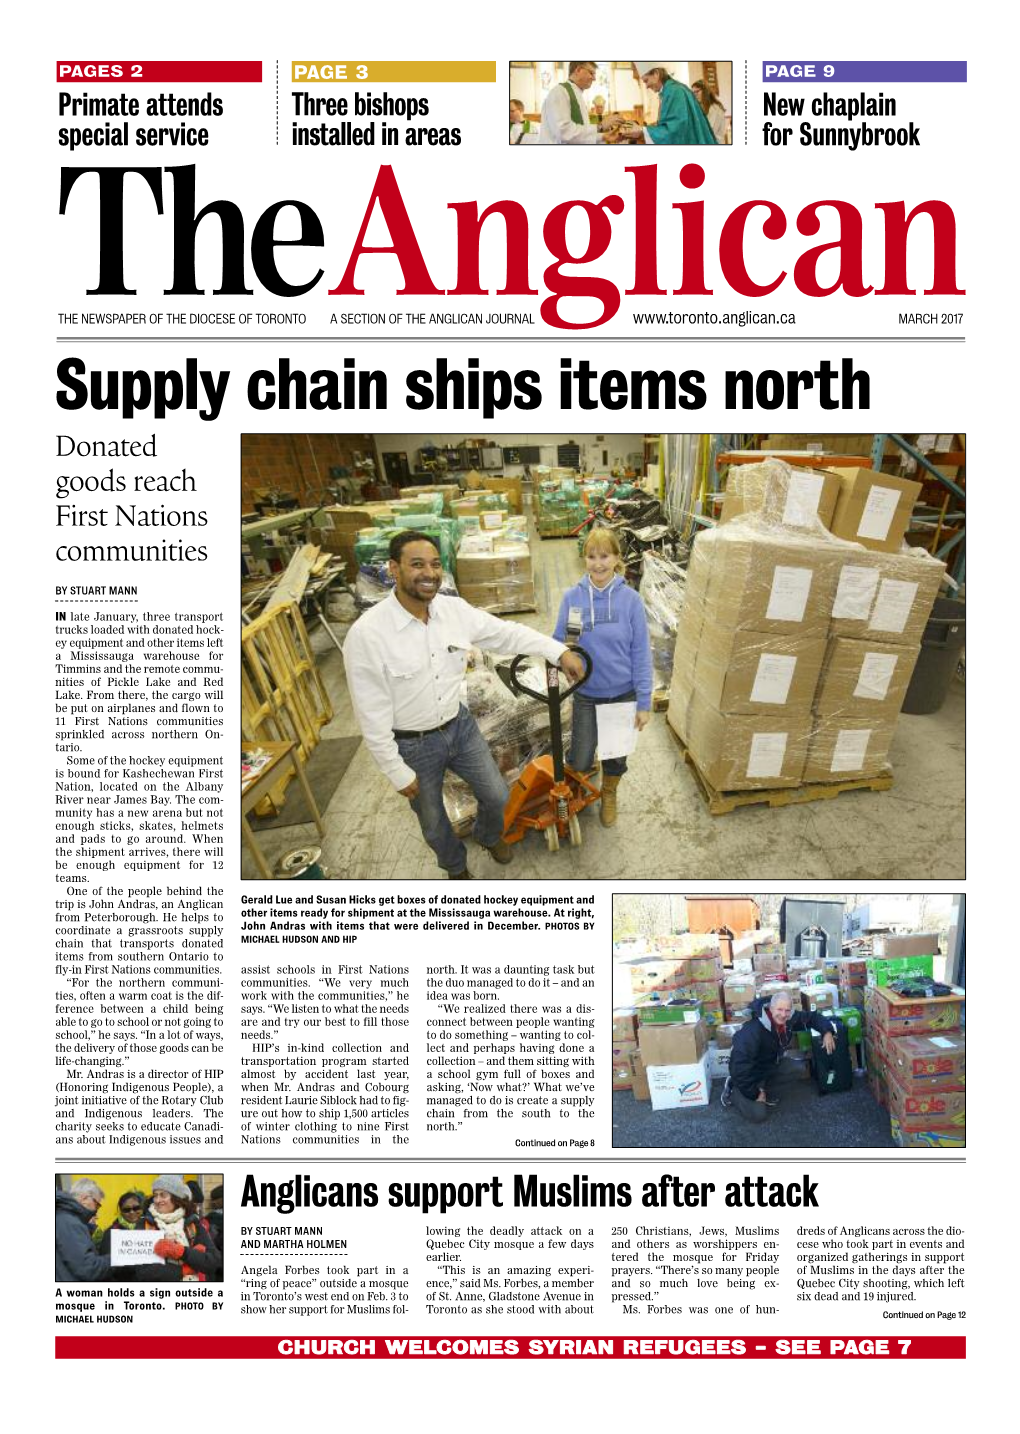 Supply Chain Ships Items North Donated Goods Reach First Nations Communities